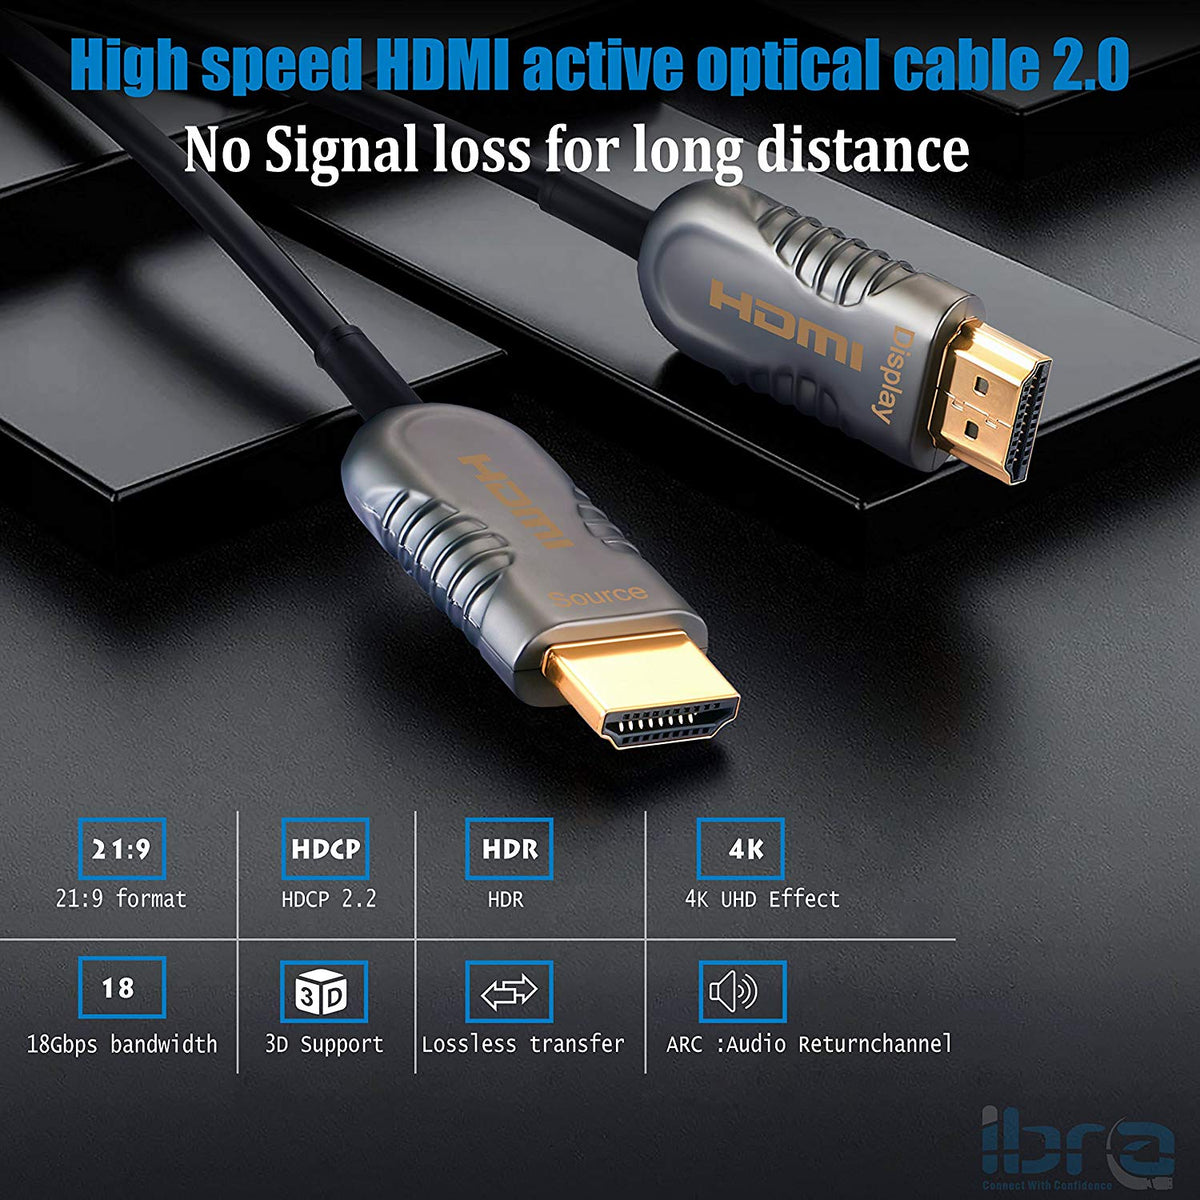 40M Fiber Optic HDMI High Speed Cable v2.0 18Gbps HDMI Lead Support 4K@60Hz/4:4:4/3D/4K HDR HDCP 2.2 for Apple TV, HDTV, Roku TV Box, Xbox One X, Home Theater, PS4, PS3 etc - IBRA OPTICAL HDMI Cable